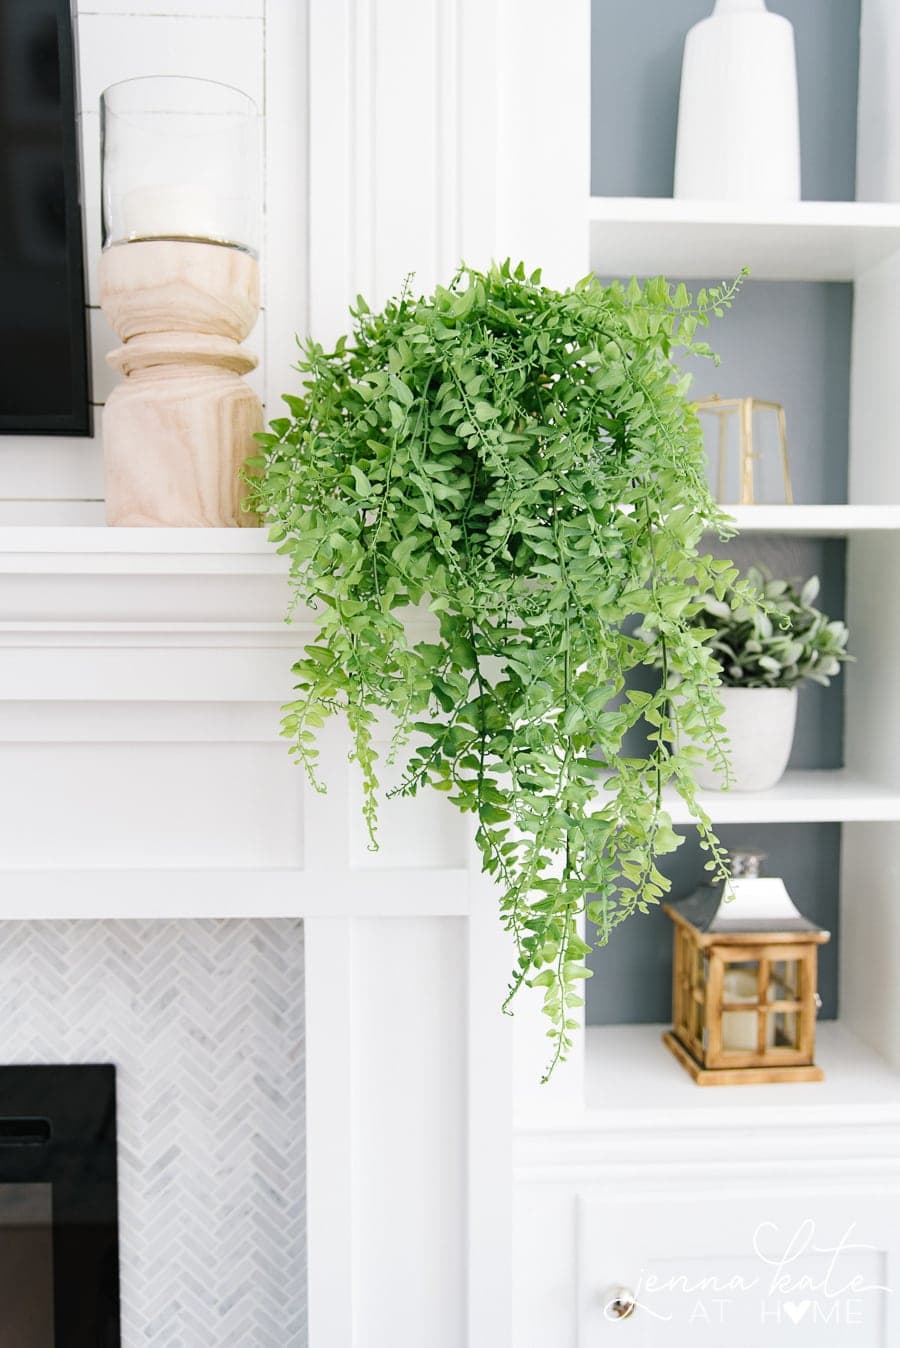 This easy faux trailing plant gives all the fresh green pops of color without the upkeep of a live plant